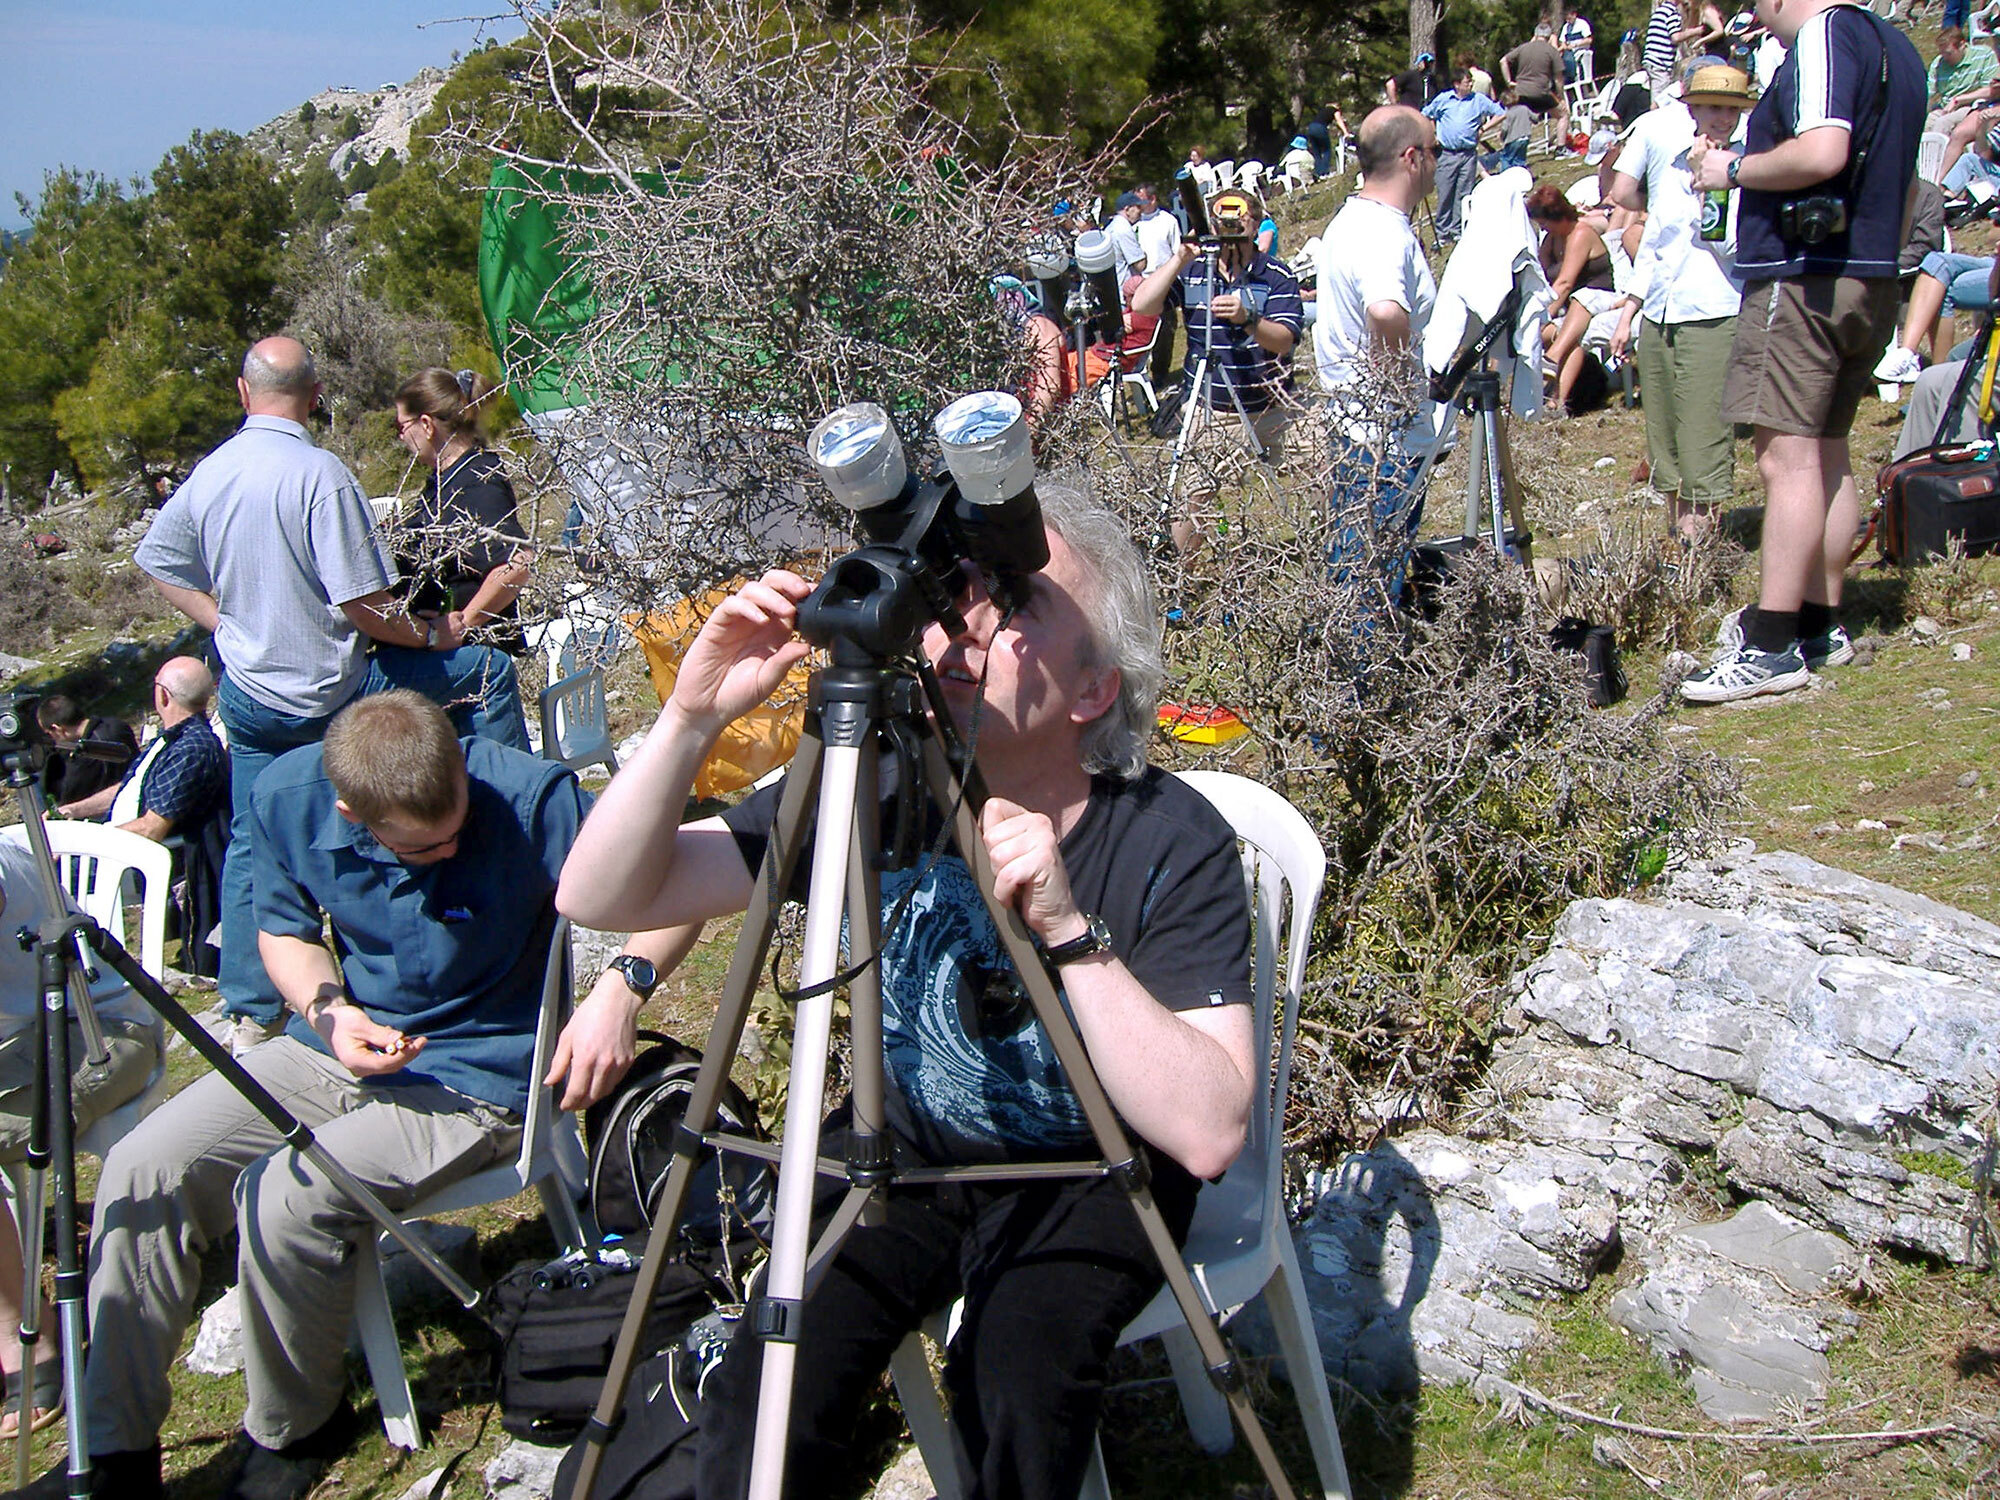 A woman sitting in a chair looking through a binocular on a tripod with solar filters over the lenses. A crowd of people is around, some also with binoculars or telescopes ready to make observations.